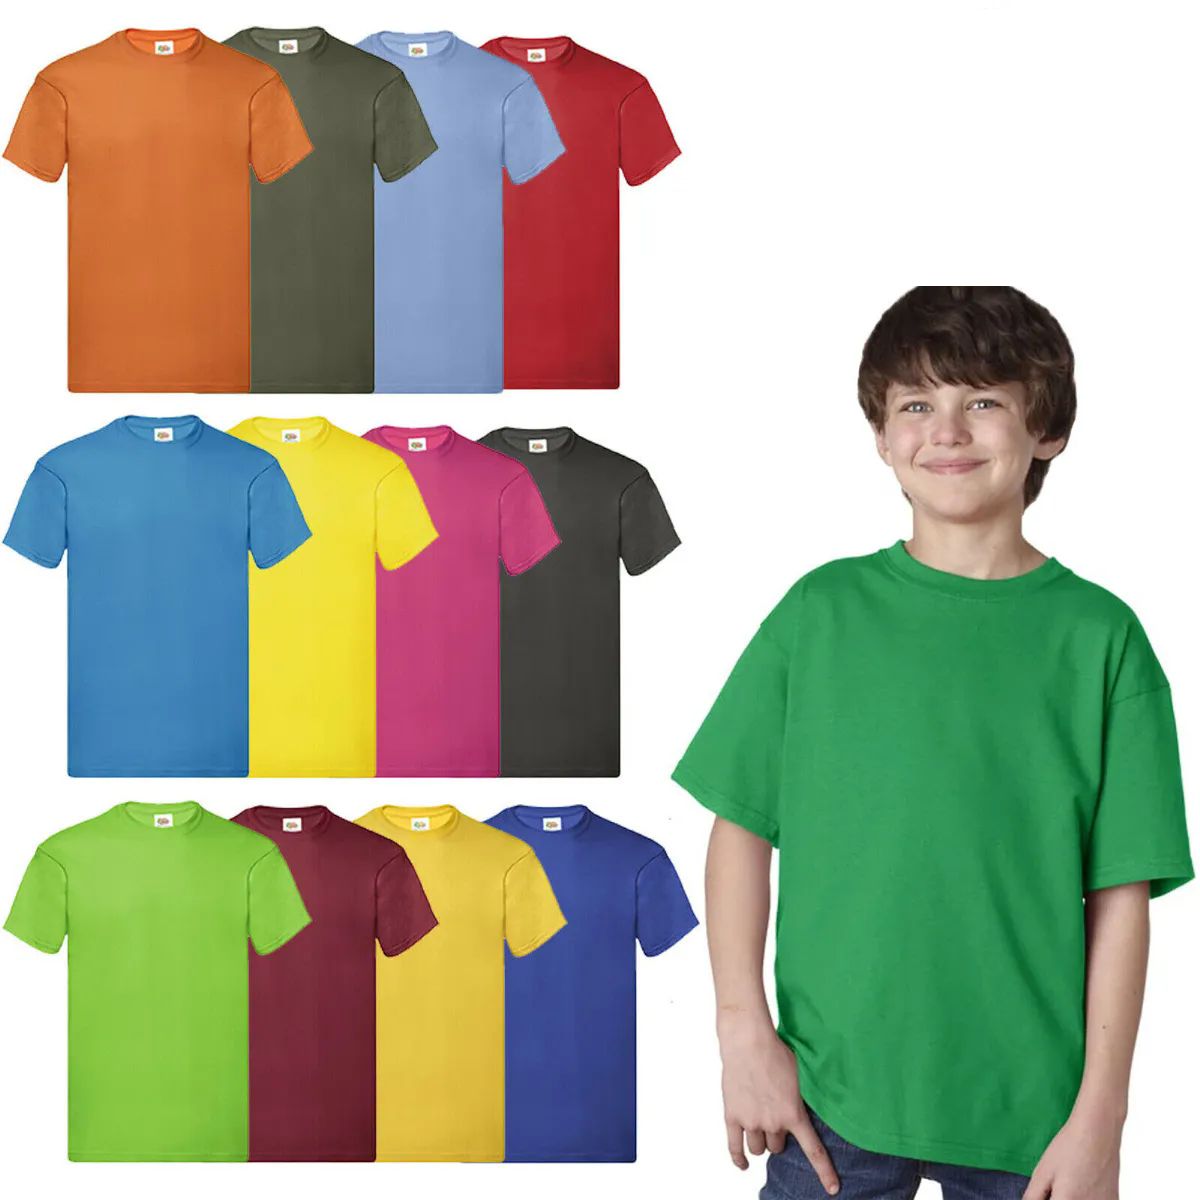 432 Pieces of Billion Hats Kids Youth Cotton Assorted Colors T Shirts Size L